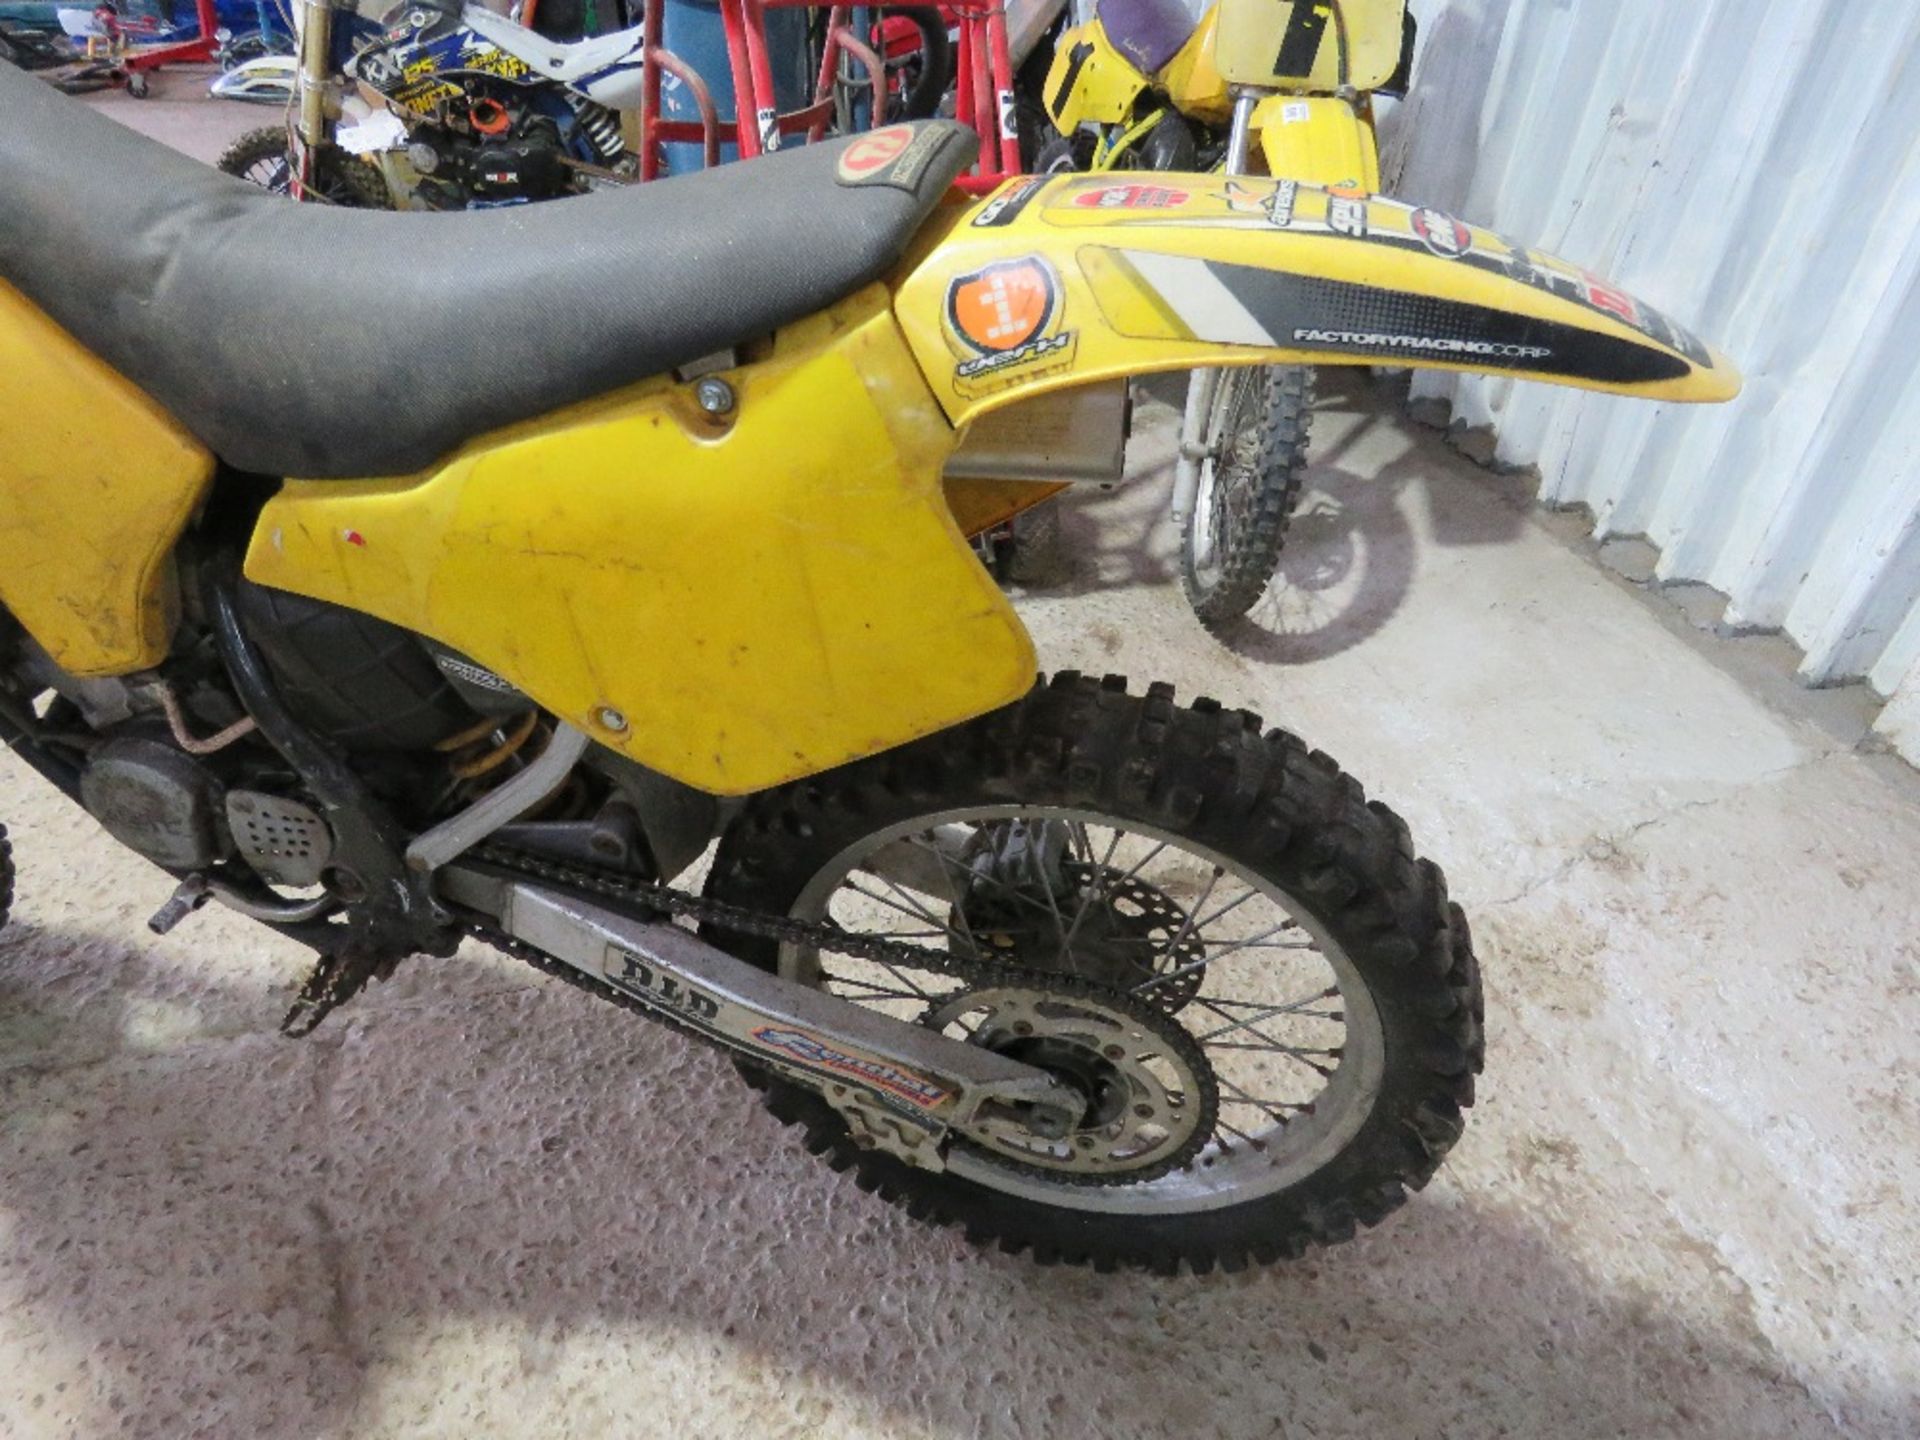 SUZUKI MOTOCROSS TRIALS MOTORBIKE. BEEN IN STORAGE AND UNUSED FOR OVER 5 YEARS. THIS LOT I - Image 5 of 9